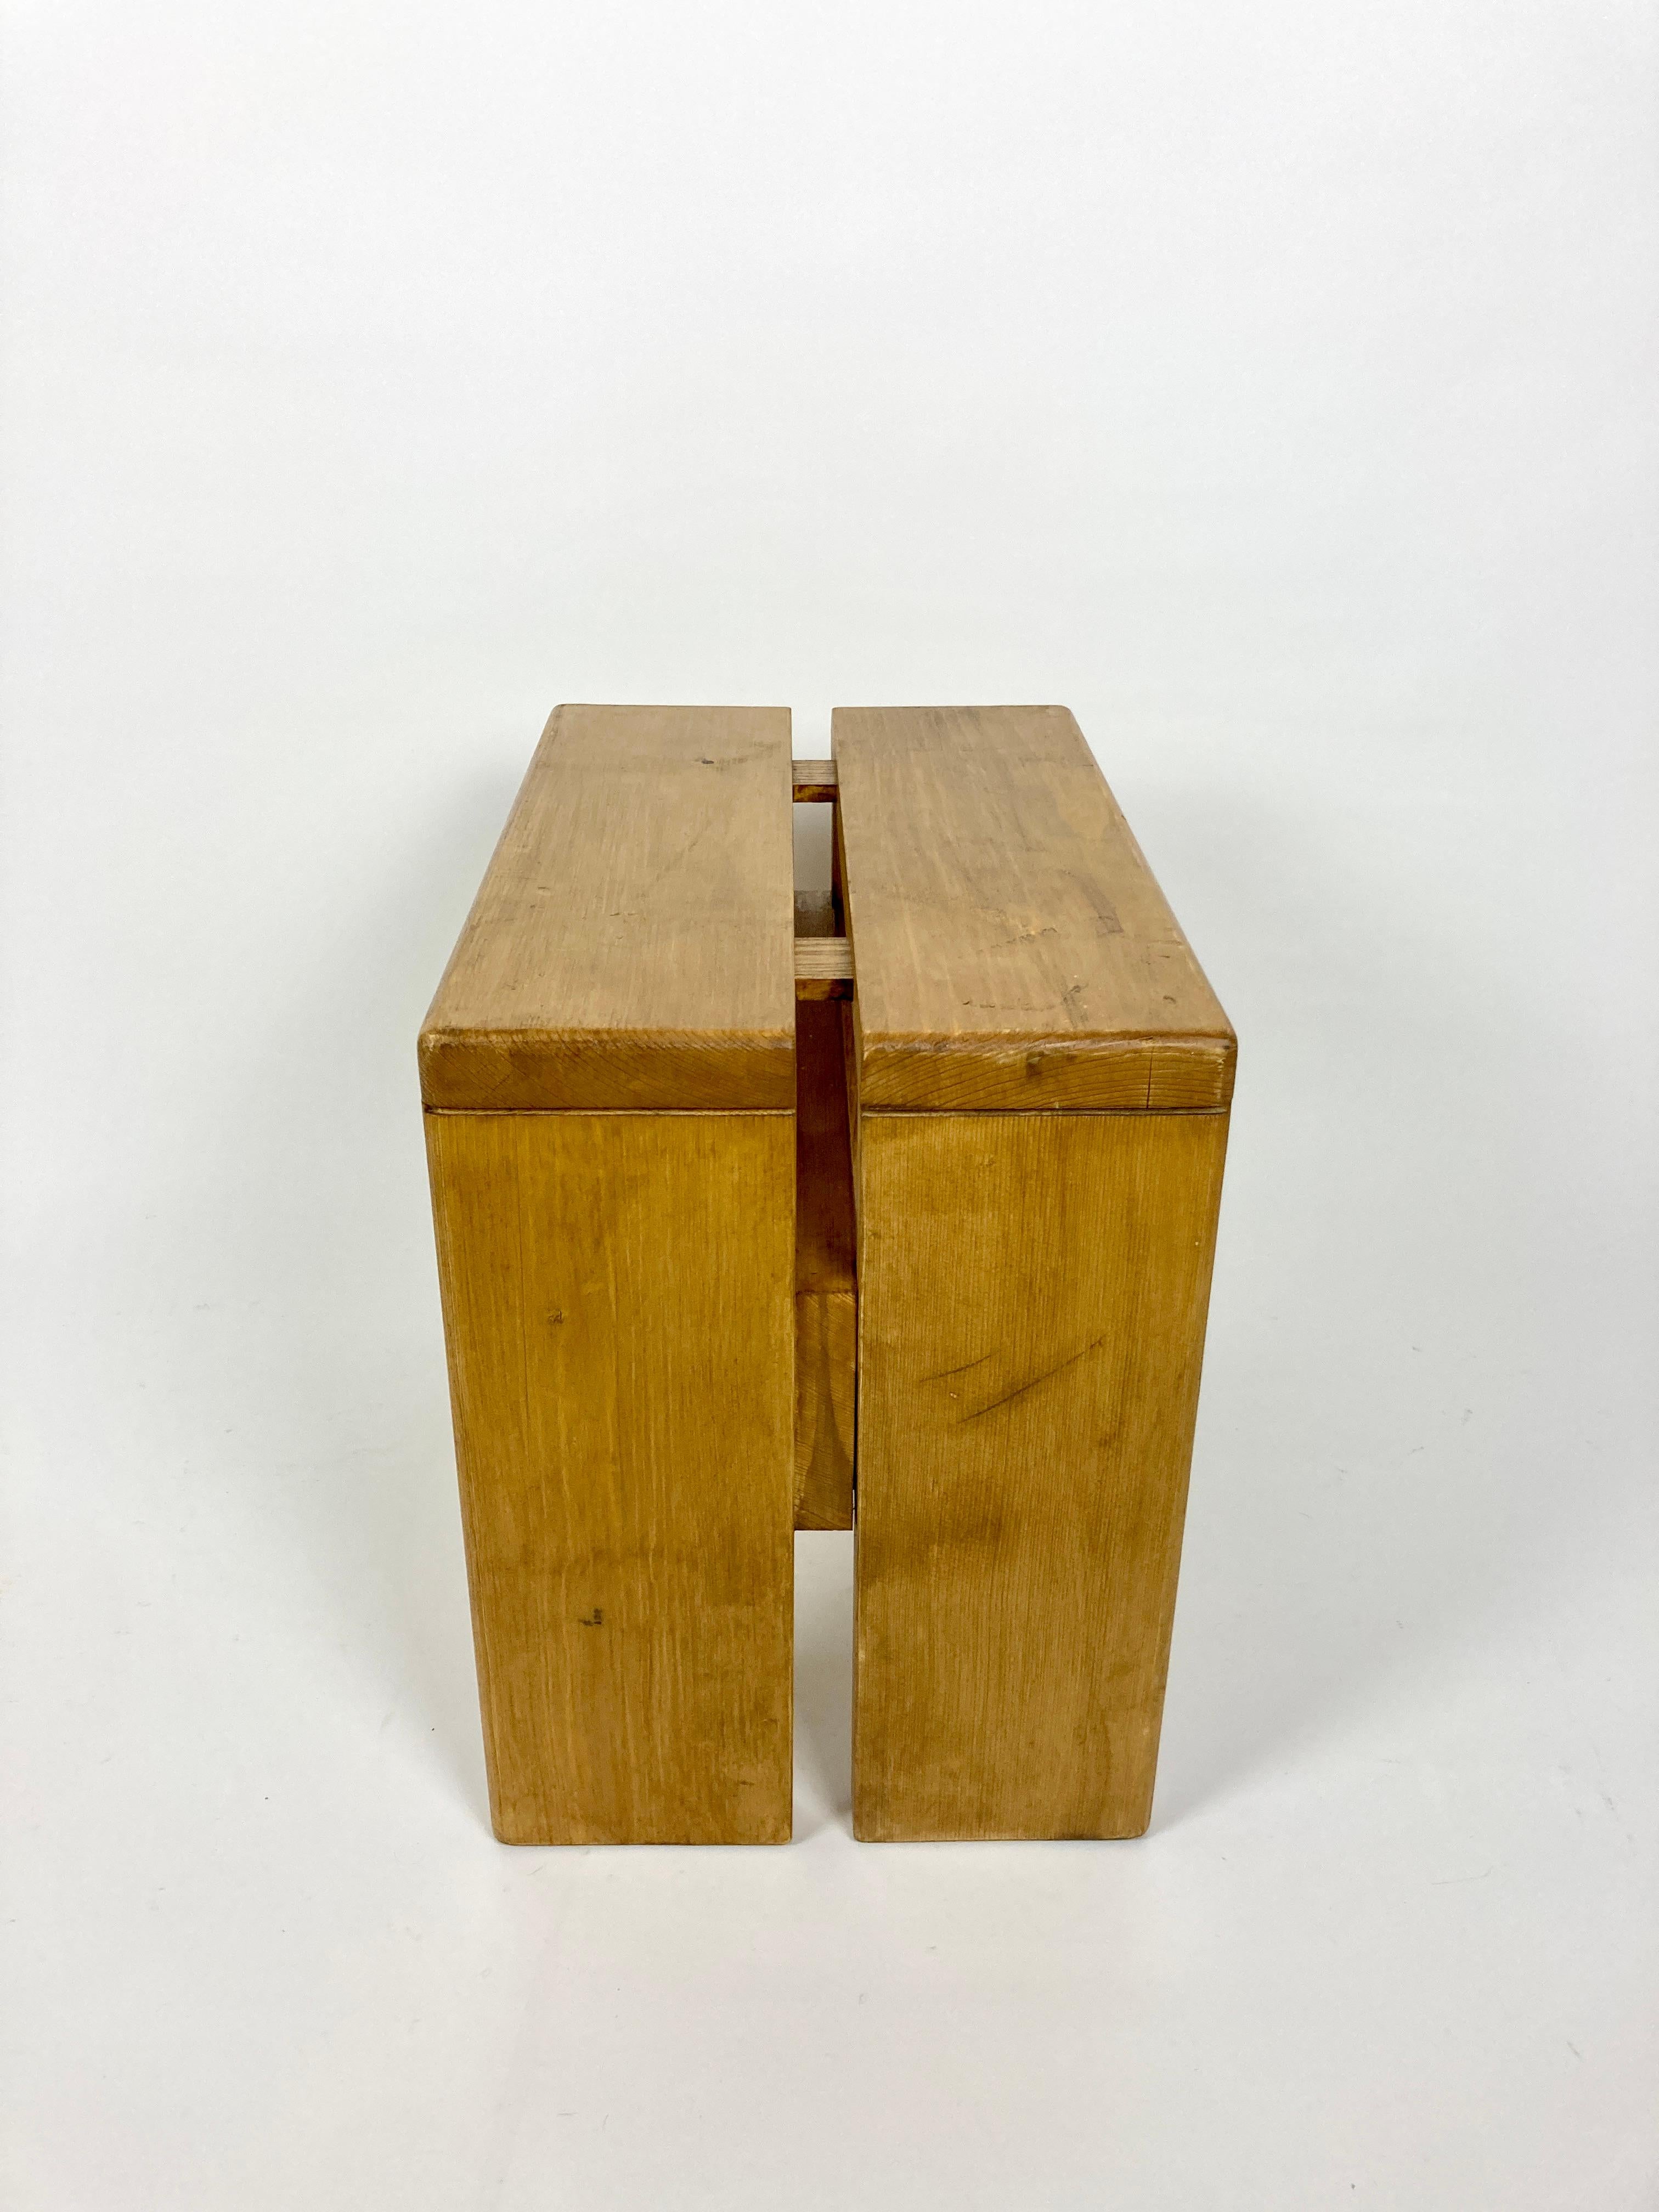 Pine Stools/Side Table from Les Arcs, France 1970s, Charlotte Perriand